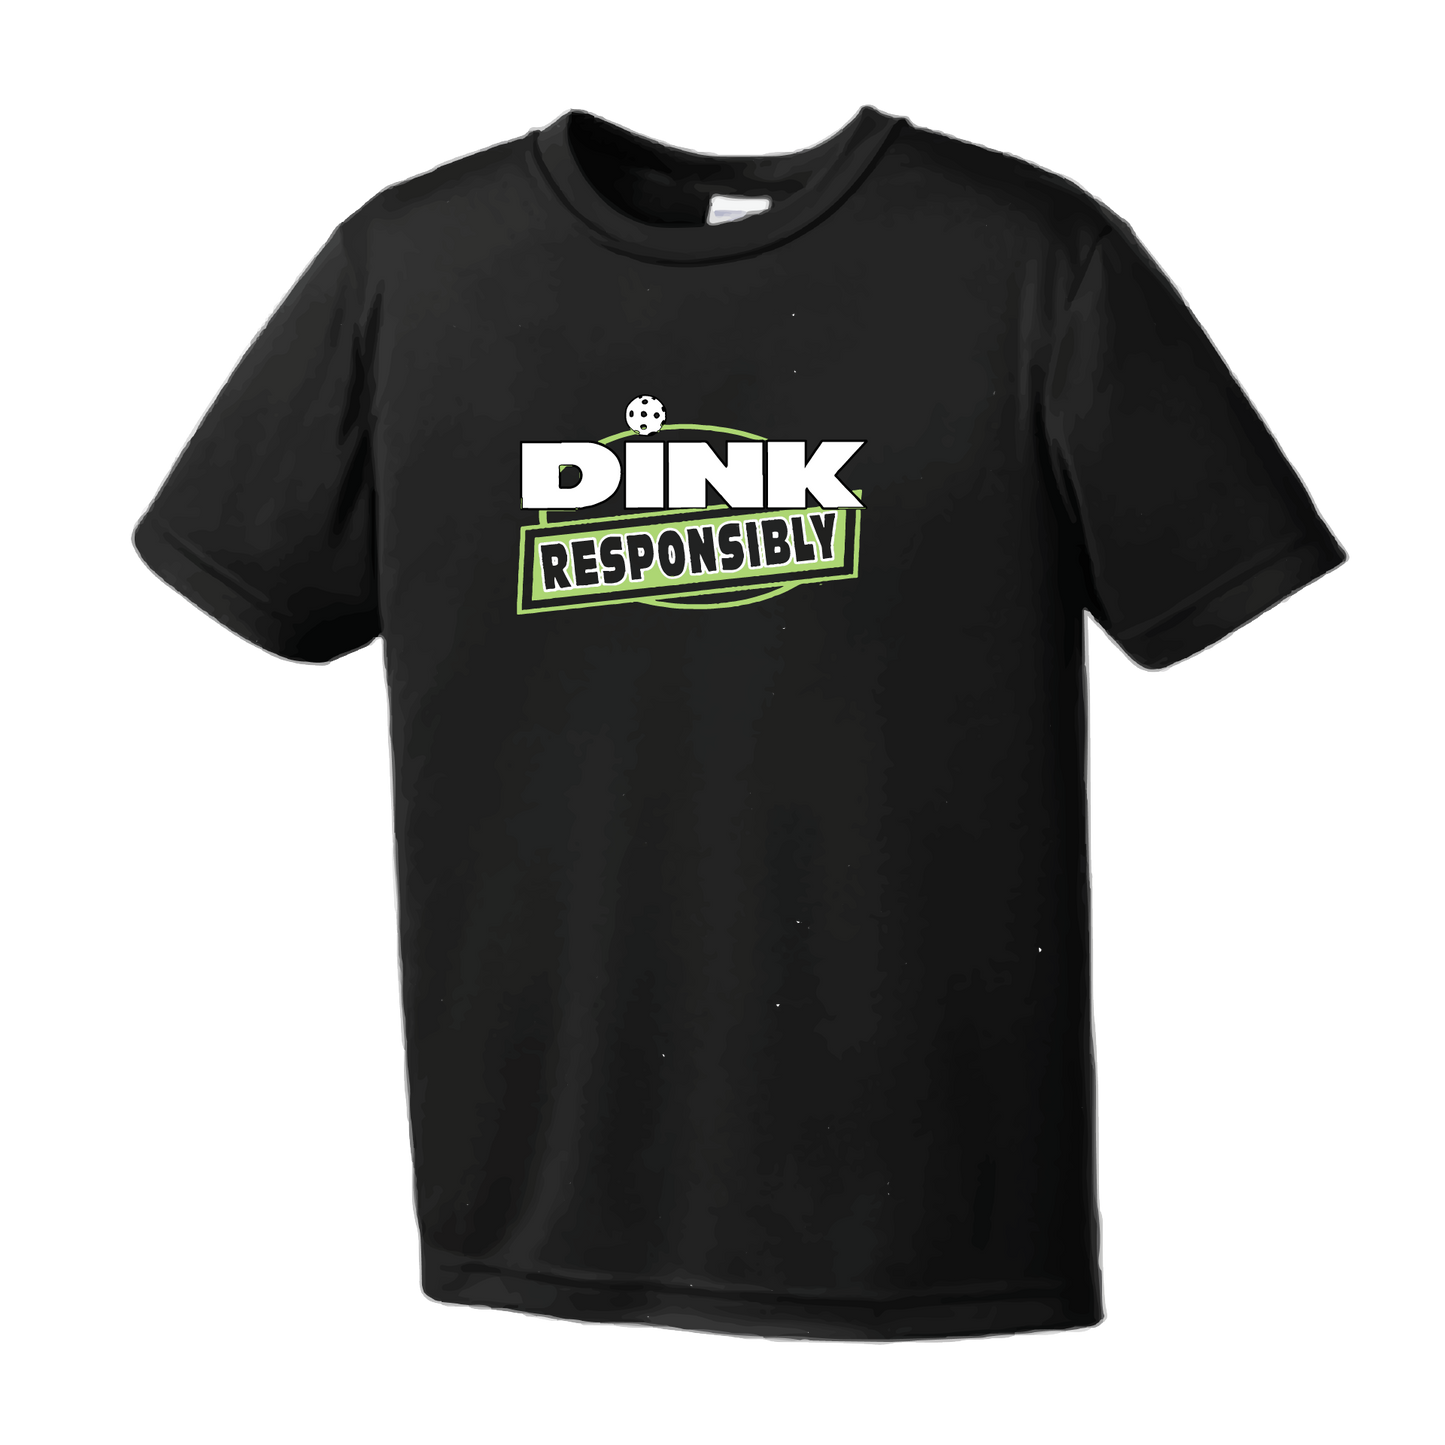 Pickleball Design: Dink Responsibly  Youth Style: Short Sleeve  Shirts are lightweight, roomy and highly breathable. These moisture-wicking shirts are designed for athletic performance. They feature PosiCharge technology to lock in color and prevent logos from fading. Removable tag and set-in sleeves for comfort.